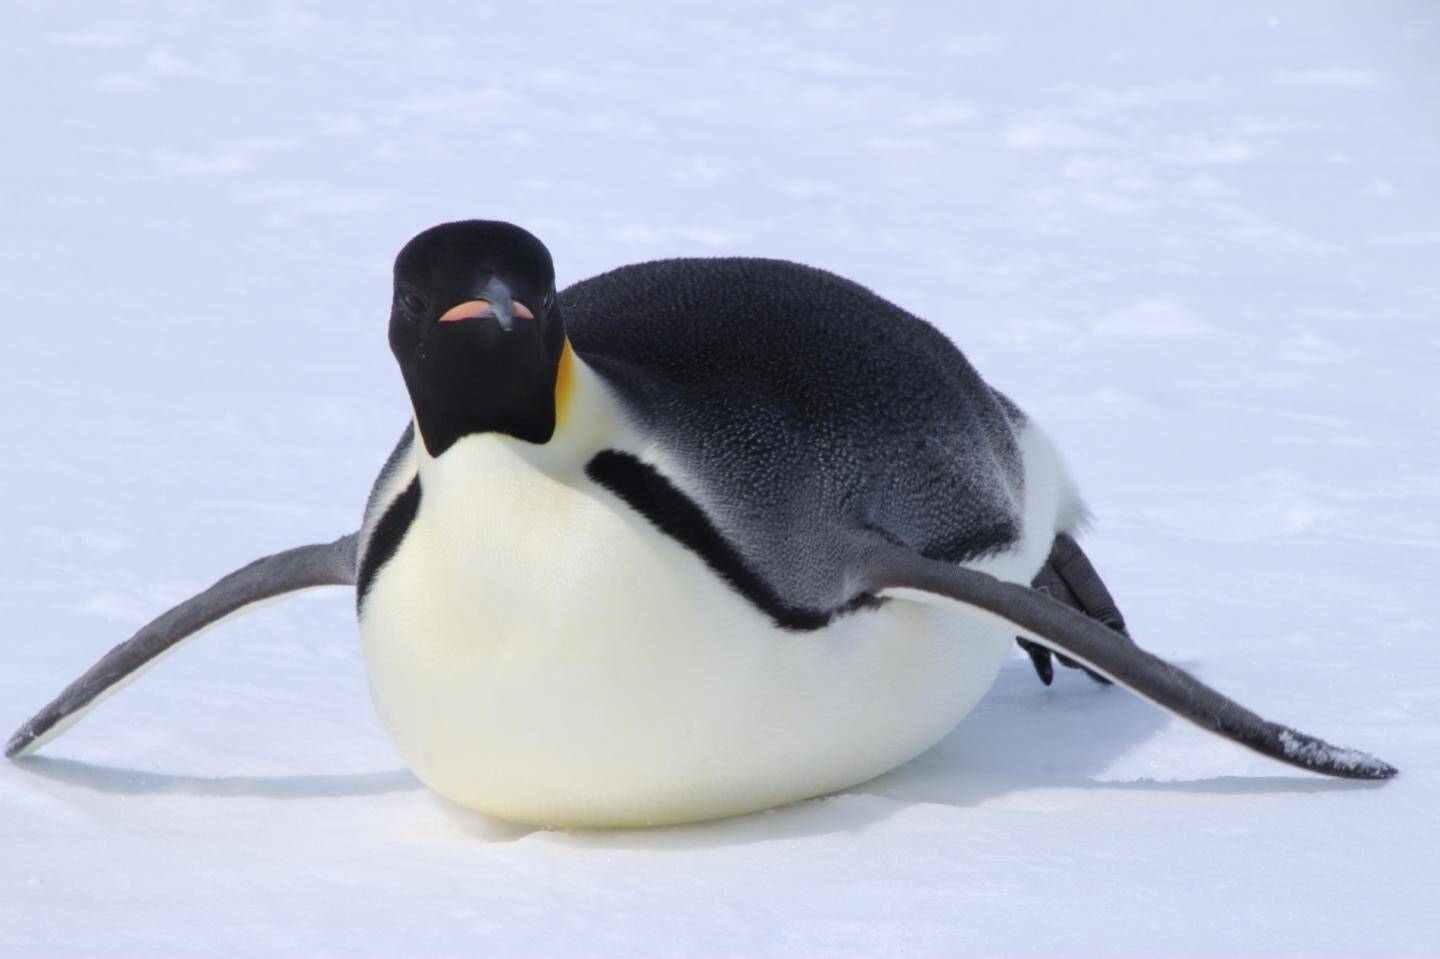 Emperor penguins often go tobogganing on their bellies to get around as their environment can be difficult to walk on.